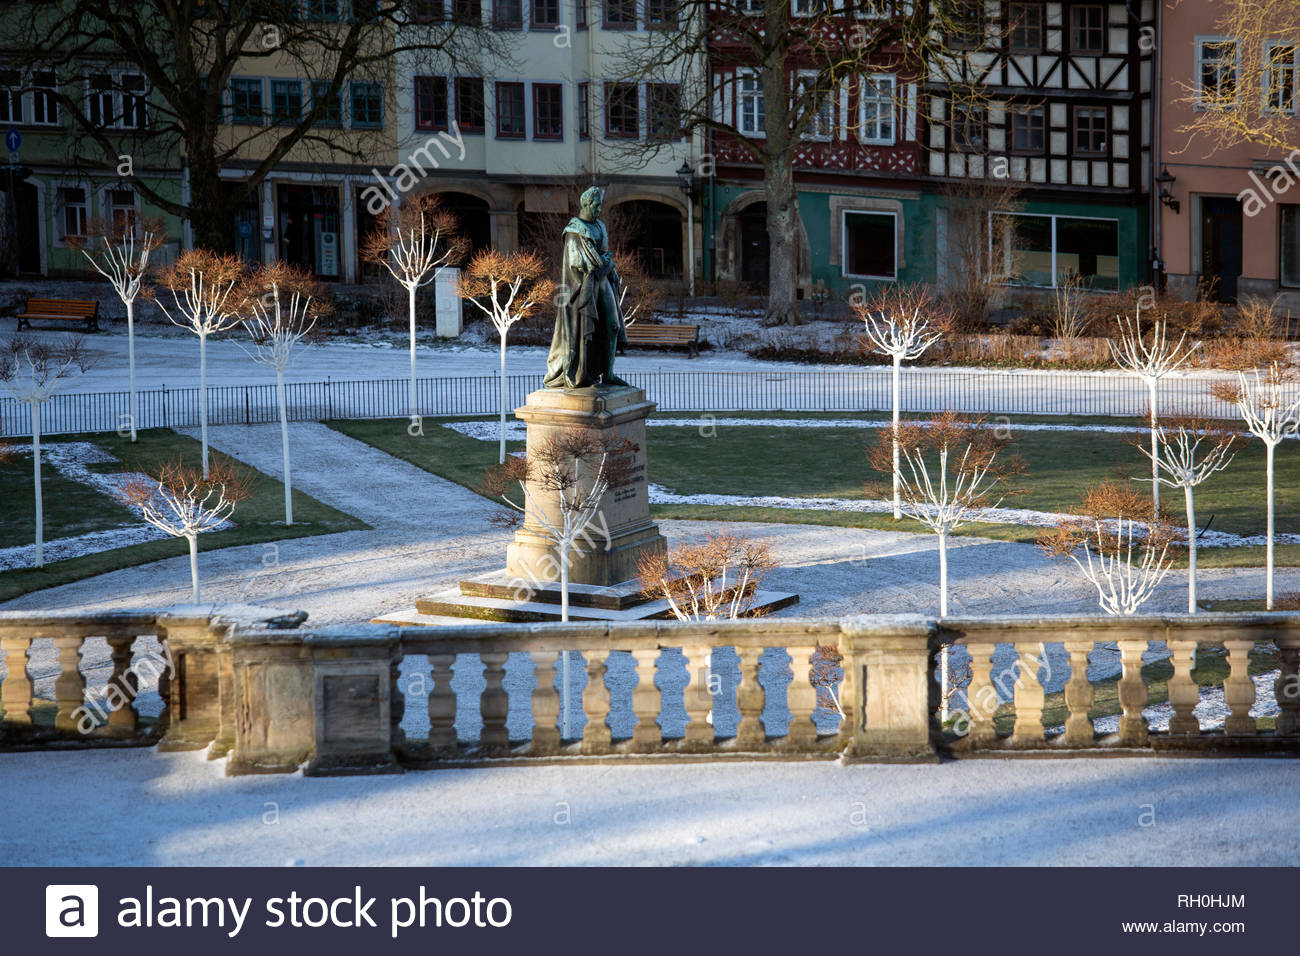 Coburg, Germany. 31st Jan, 2019. Cold, crisp weather in Coburg, Germany after light snowfall. Temperatures are expected to drop slightly over the next few days. Credit: Reallifephotos/Alamy Live News Stock Photo